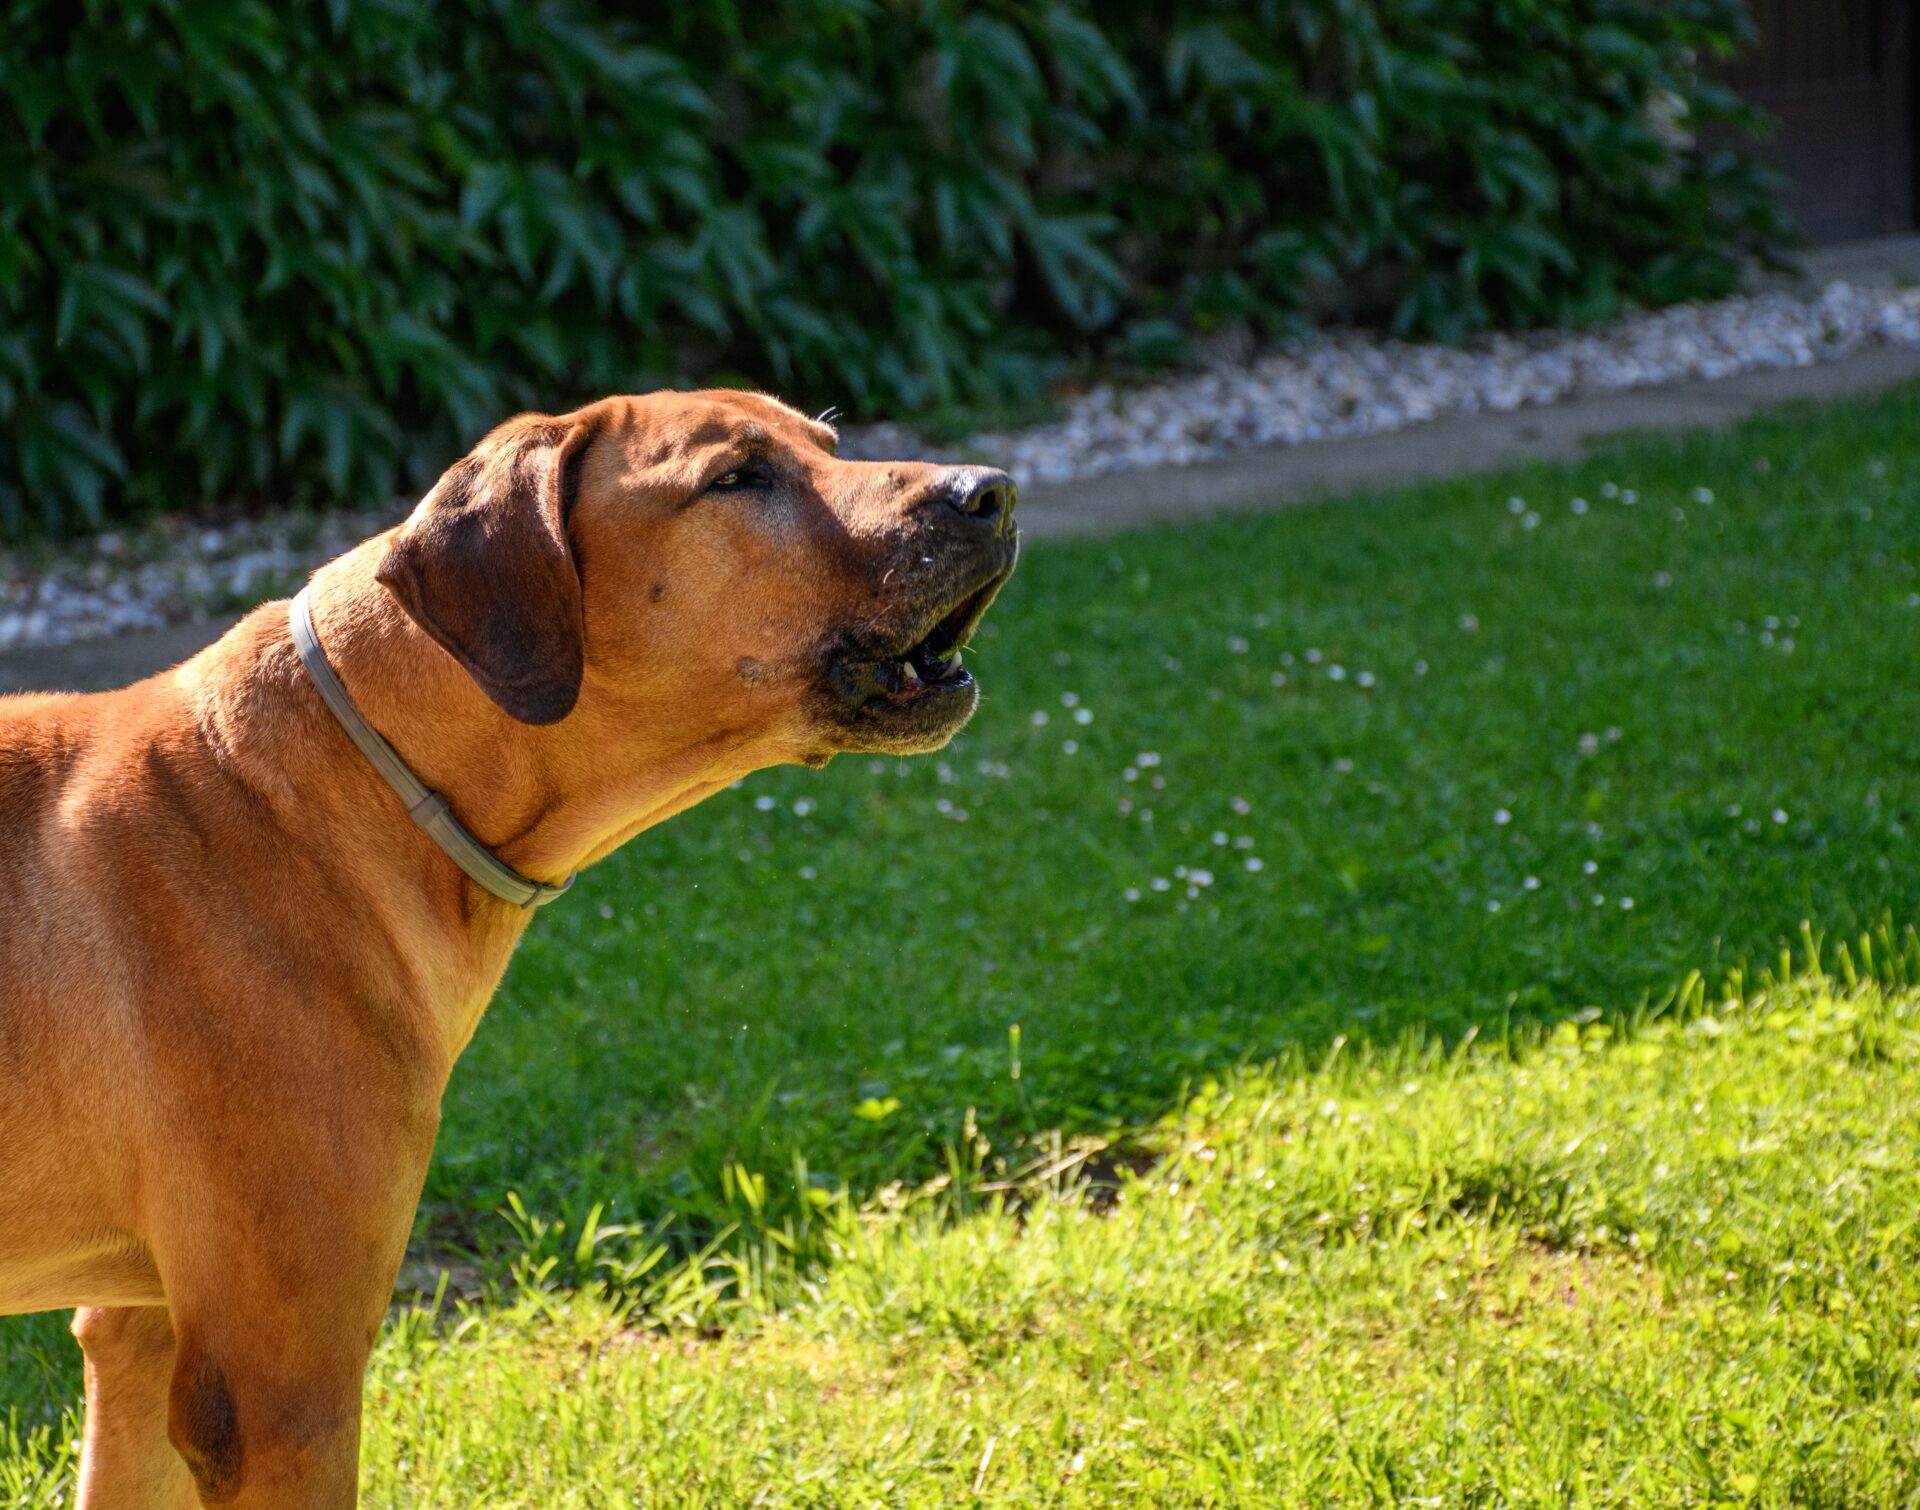 teaching your dog to speak is an easy dog trick